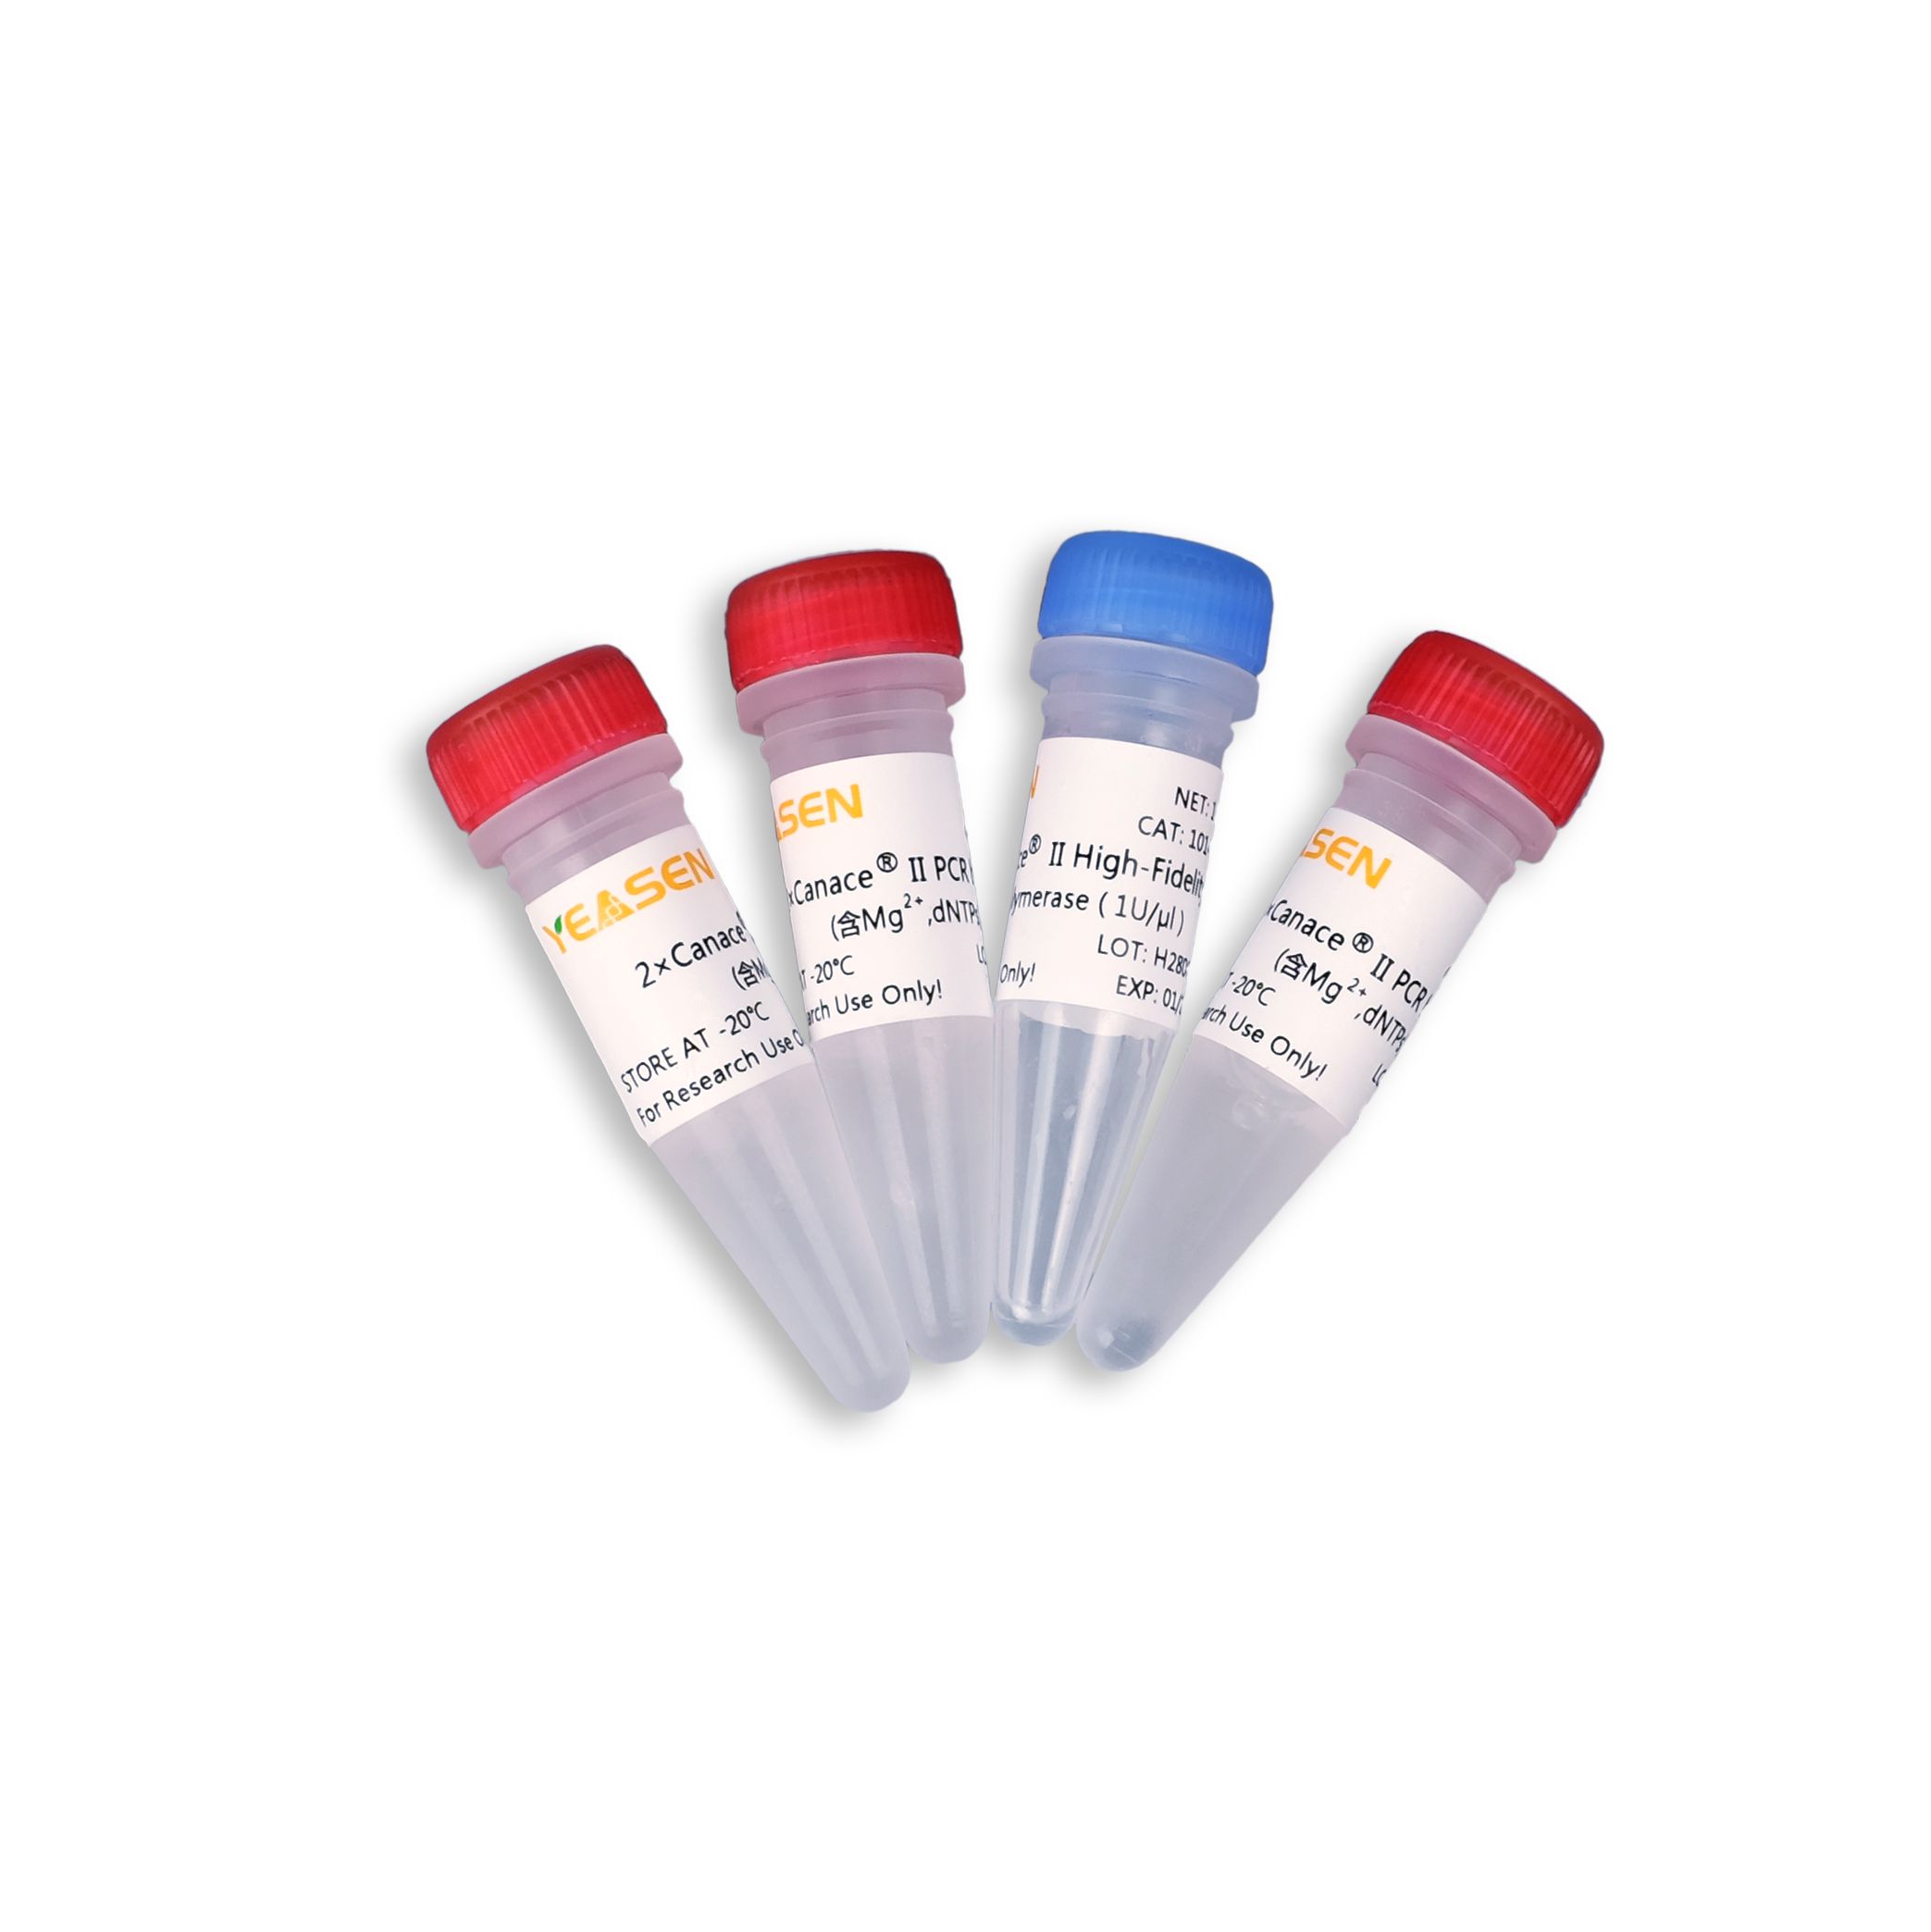 Hieff Canace®Ⅱ High-Fidelity DNA Polymerase 高保真DNA聚合酶